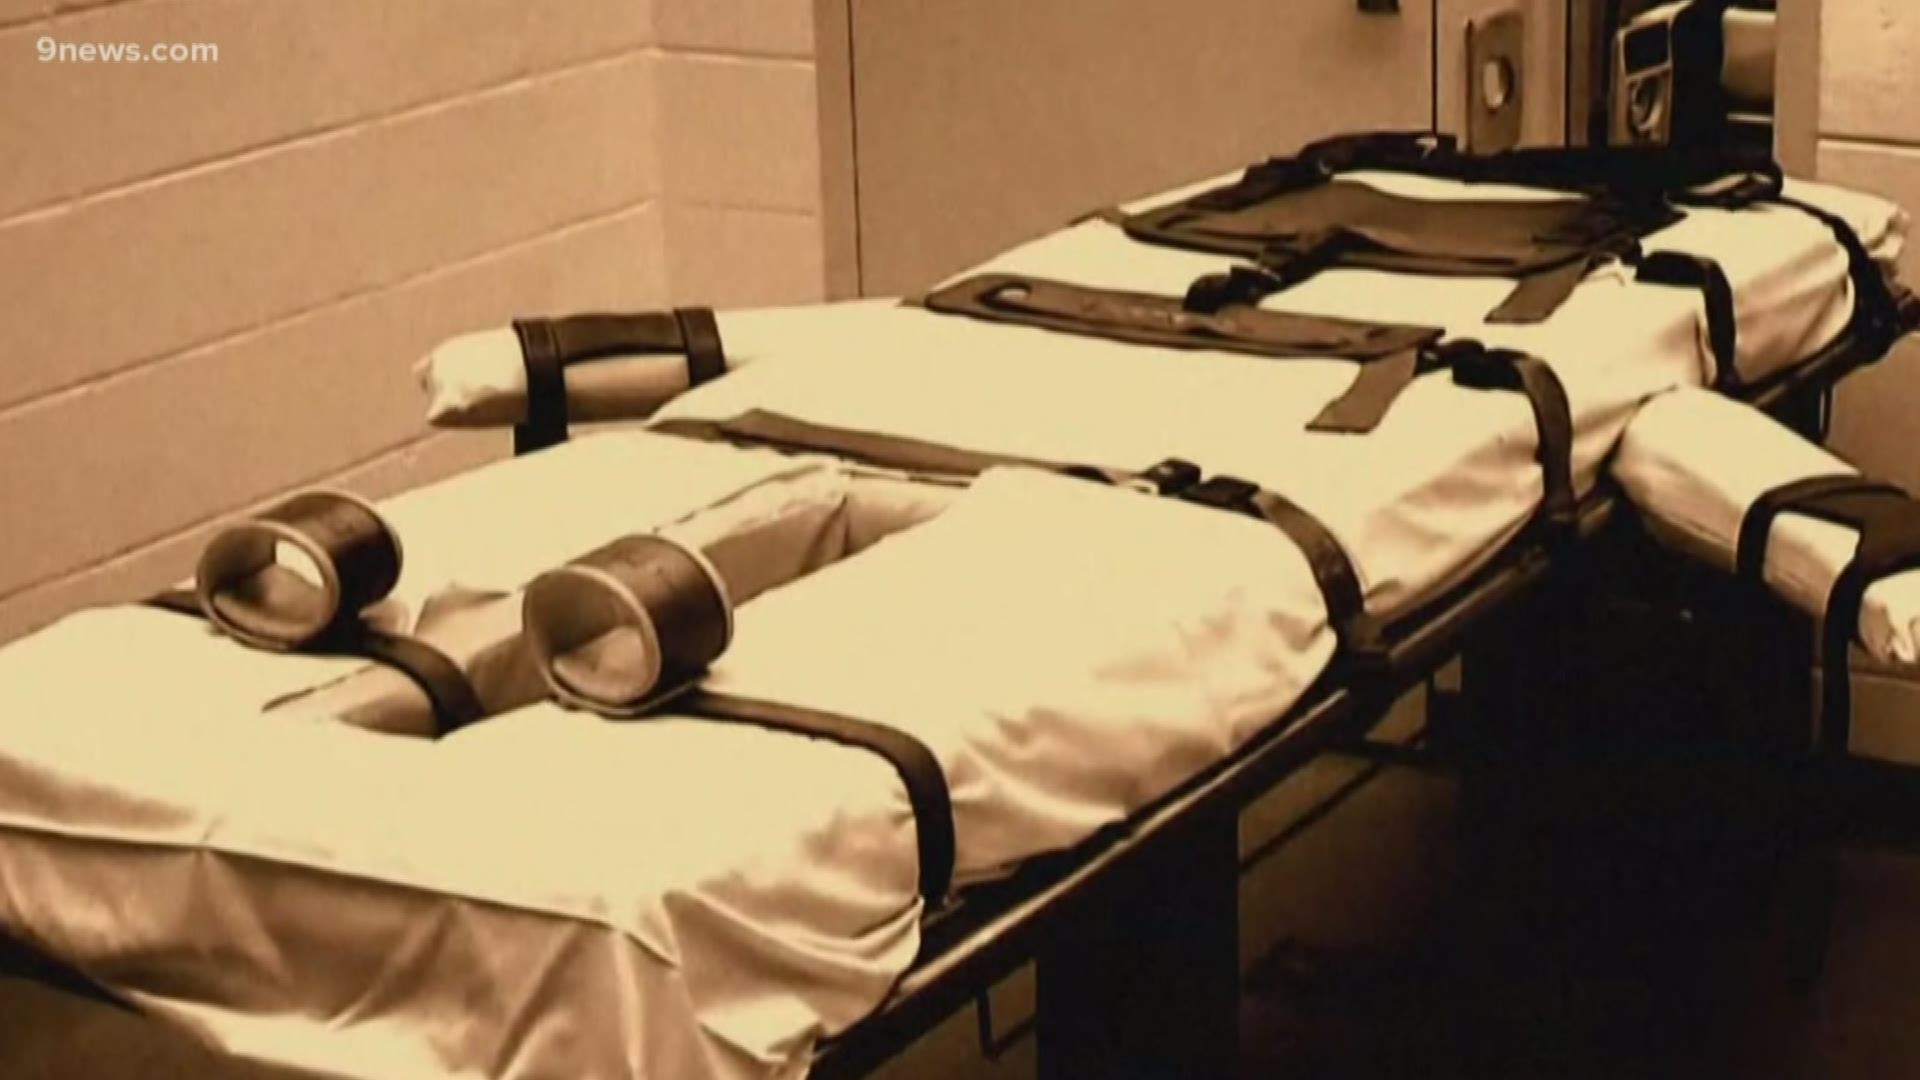 If given final approval the bill would repeal Colorado's death penalty effective July 1 of this year.